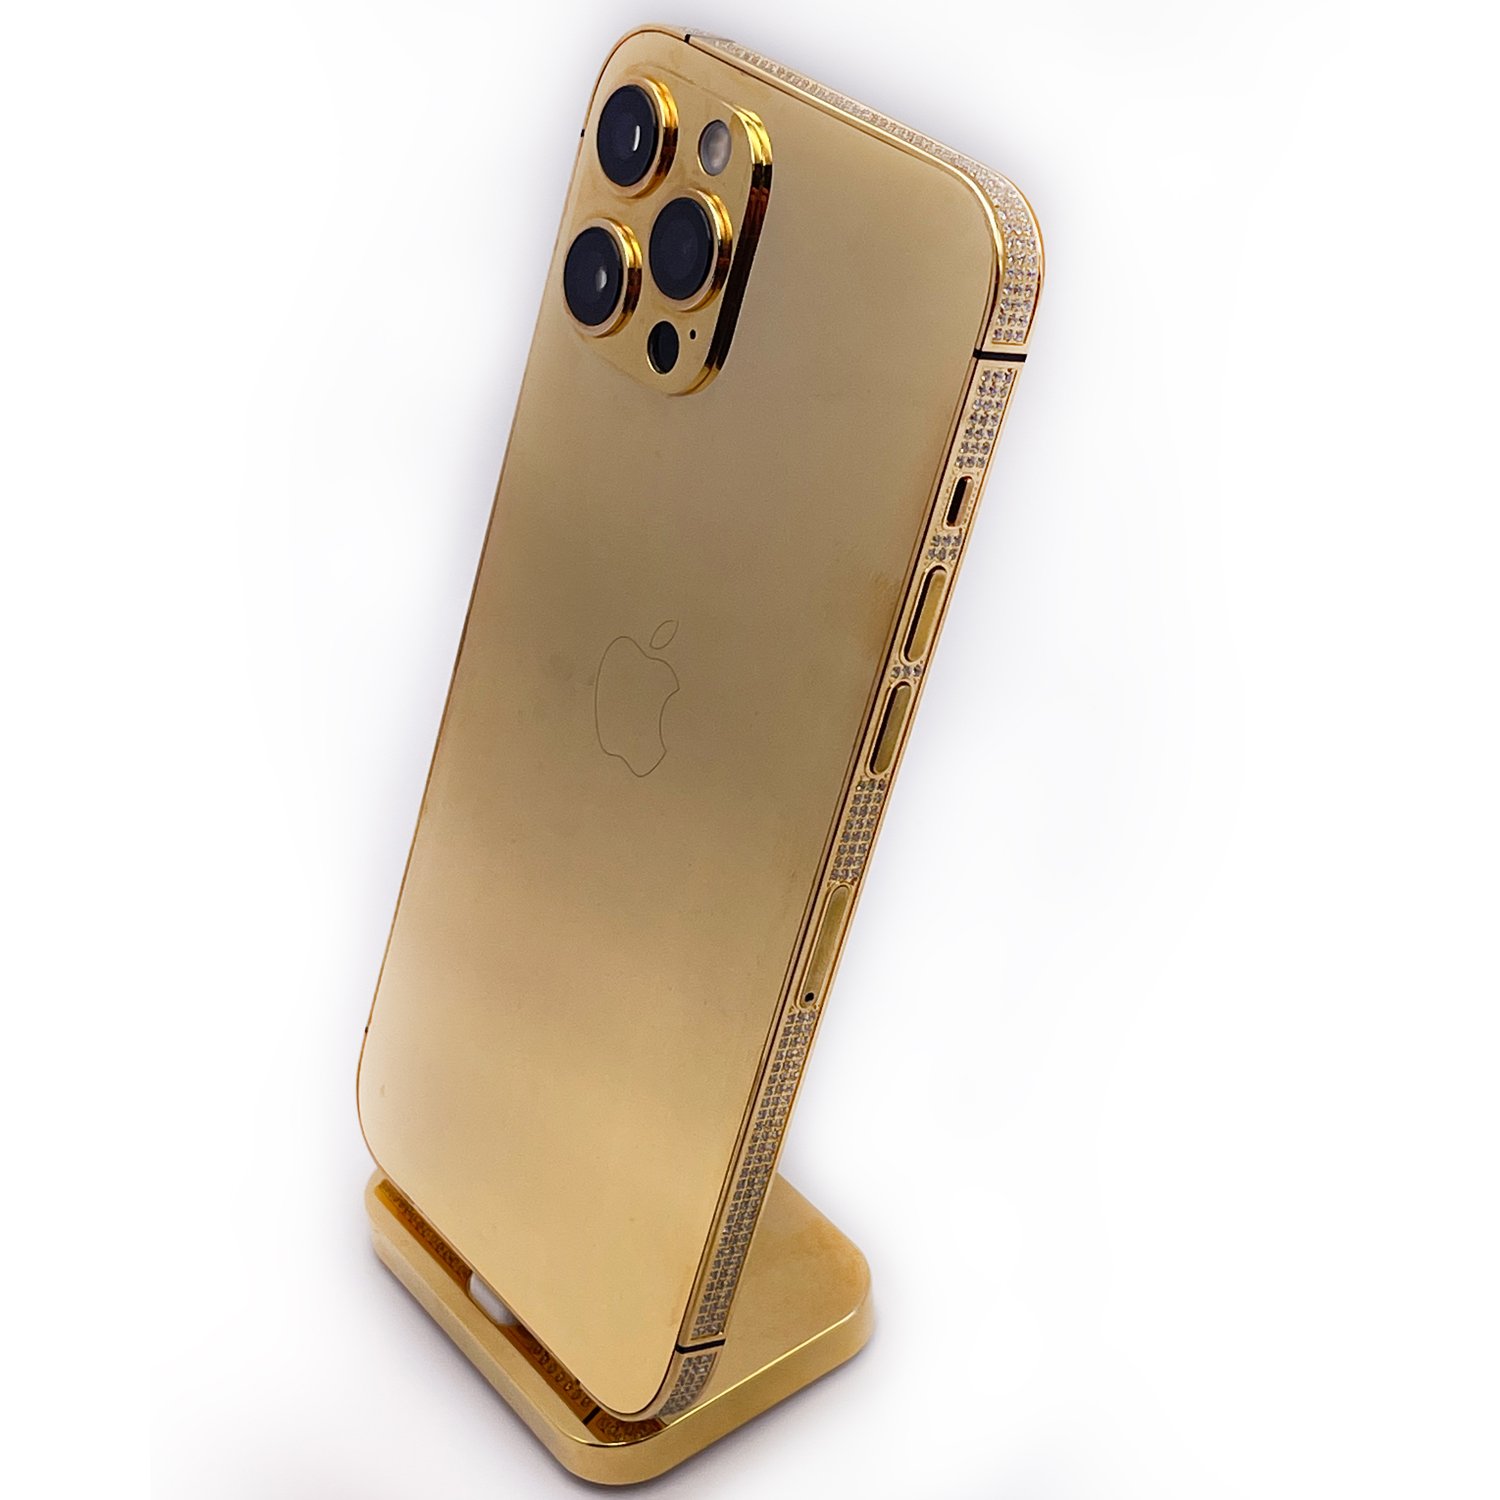 iPhone 12 Pro Max 512gb 24k Gold Plated Diamond Edition - The Lux